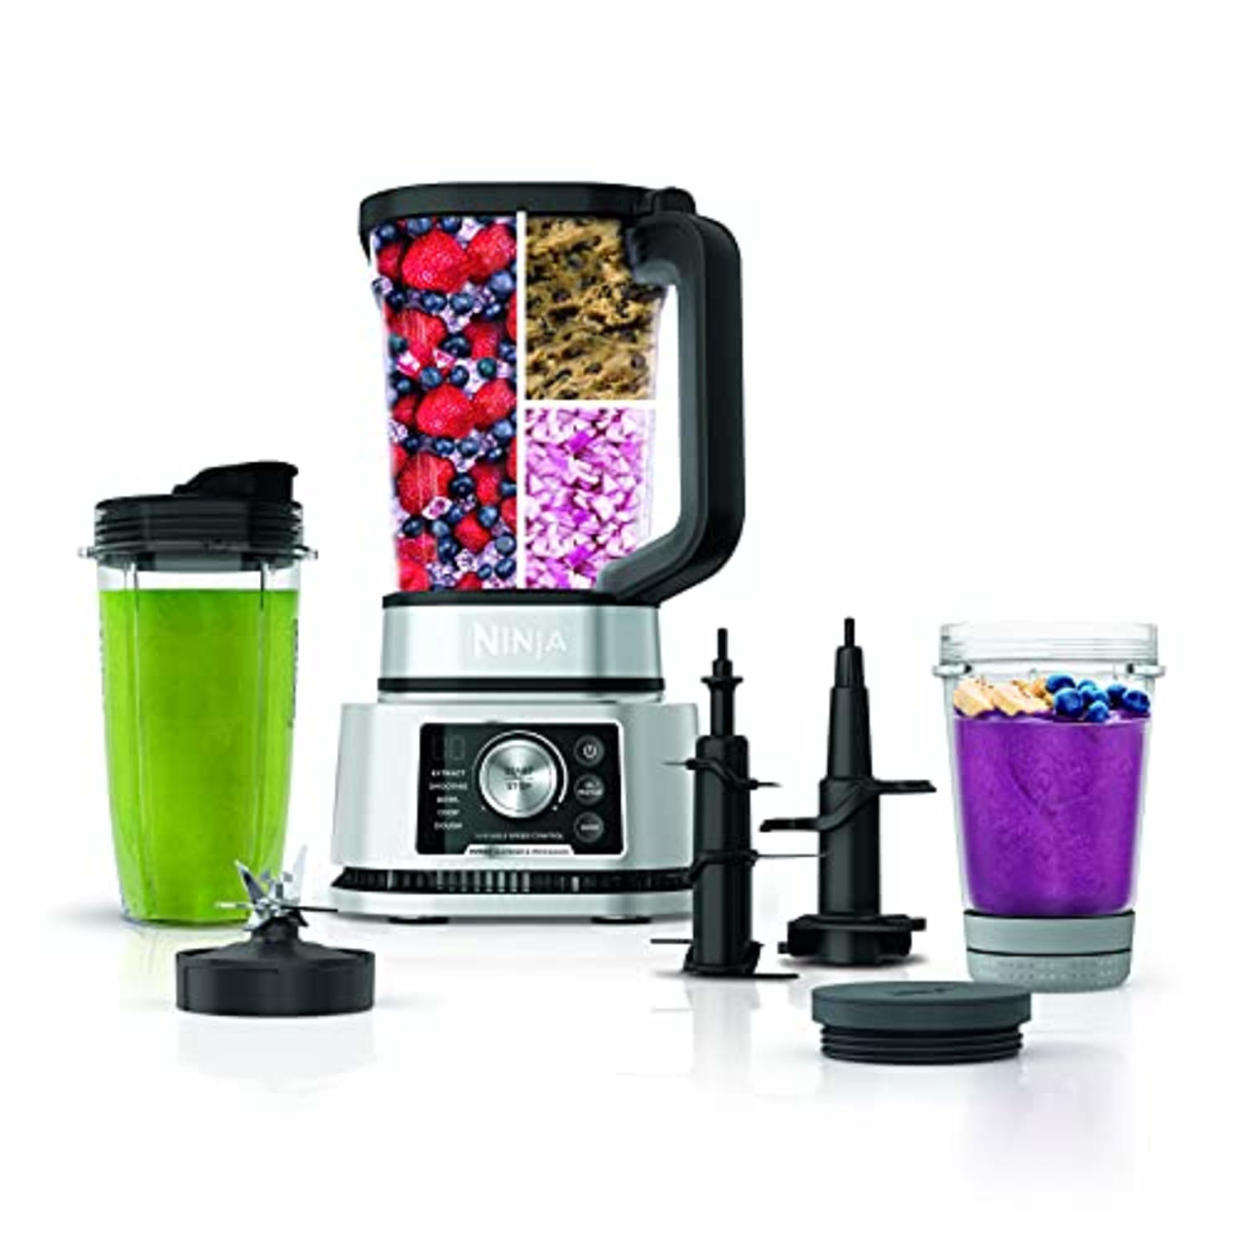 Ninja SS351 Foodi Power Blender & Processor System 1400 WP Smoothie Bowl Maker & Nutrient Extractor* 6 Functions for Bowls, Spreads, Dough & More, smartTORQUE, 72-oz.** Pitcher & To-Go Cups, Silver (AMAZON)